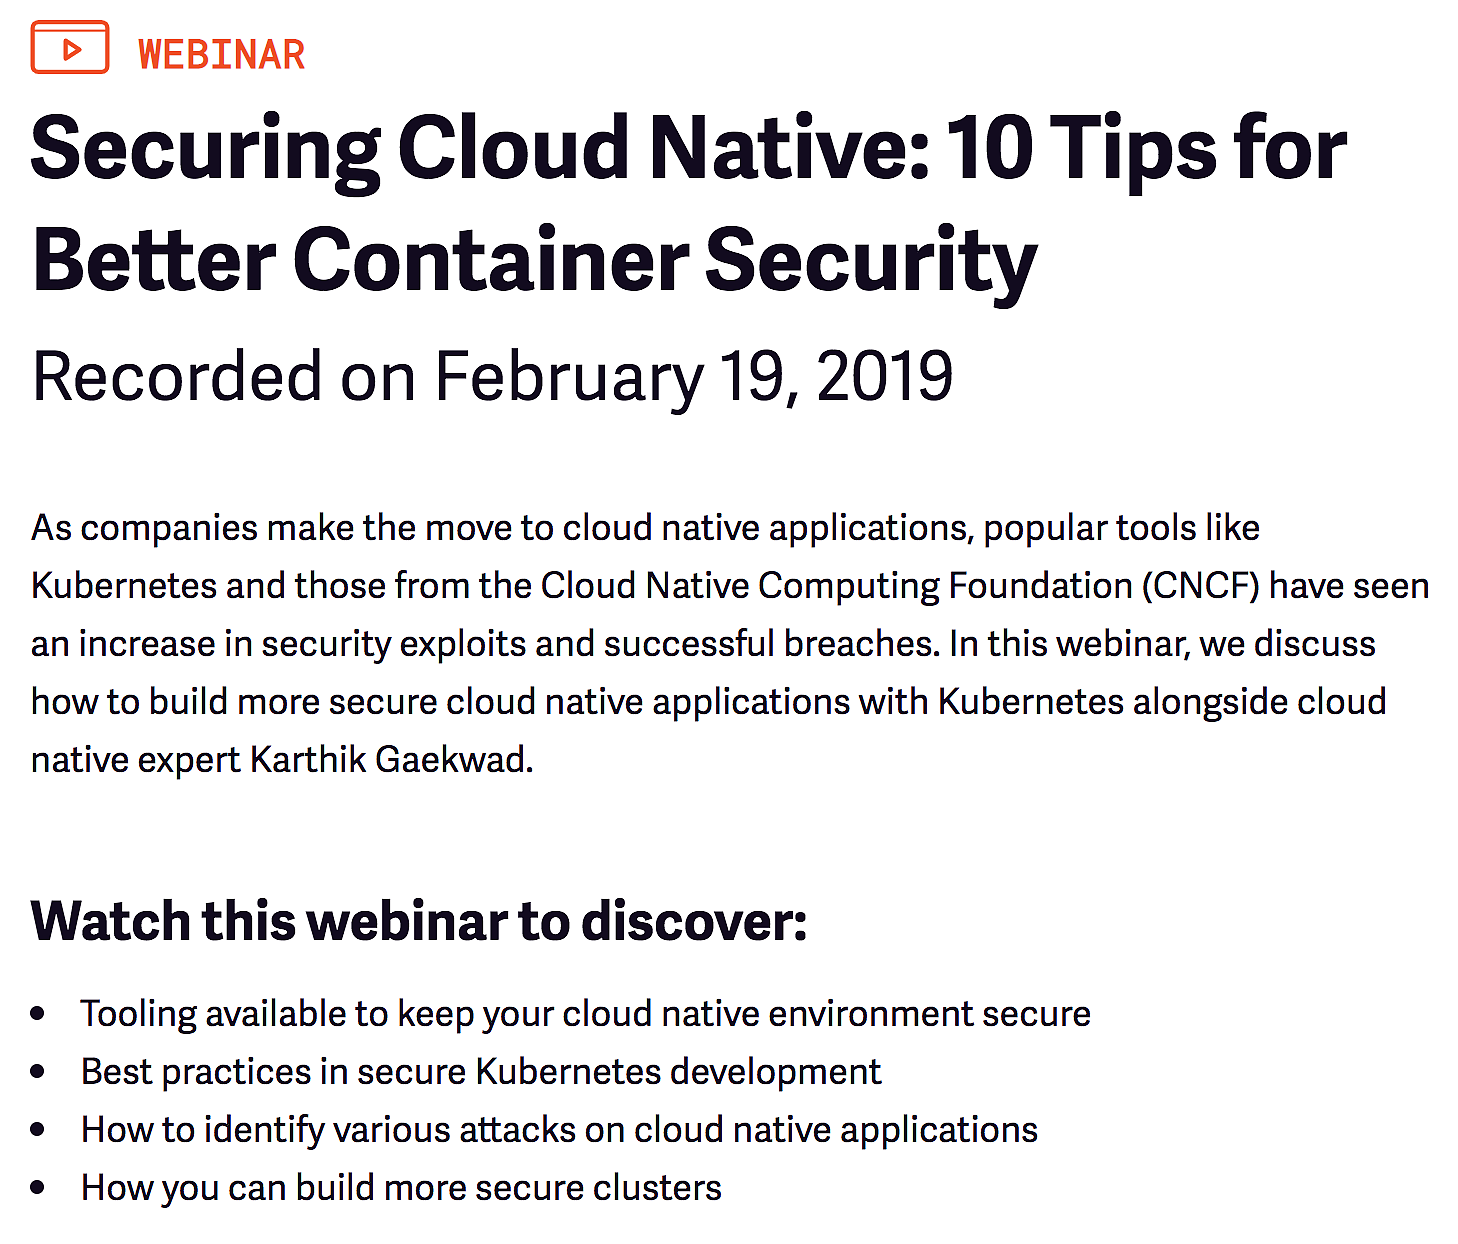 10 tips for Cloud Native Security